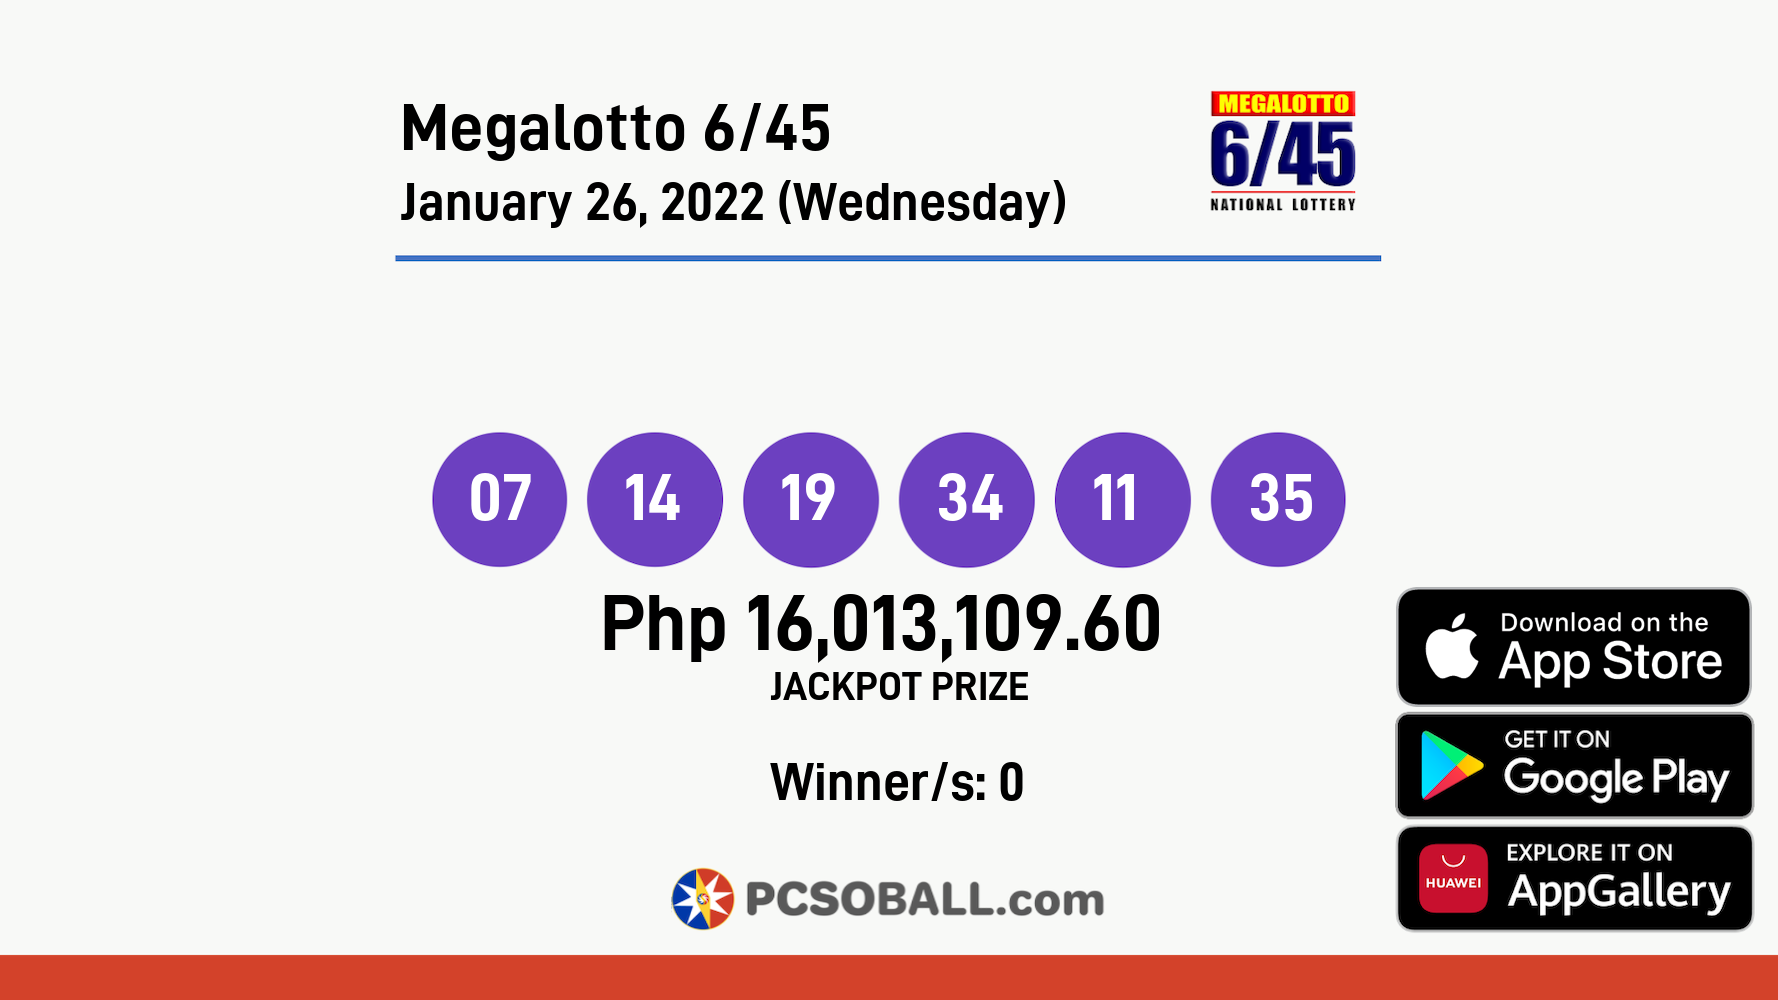 Megalotto 6/45 January 26, 2022 (Wednesday) Result